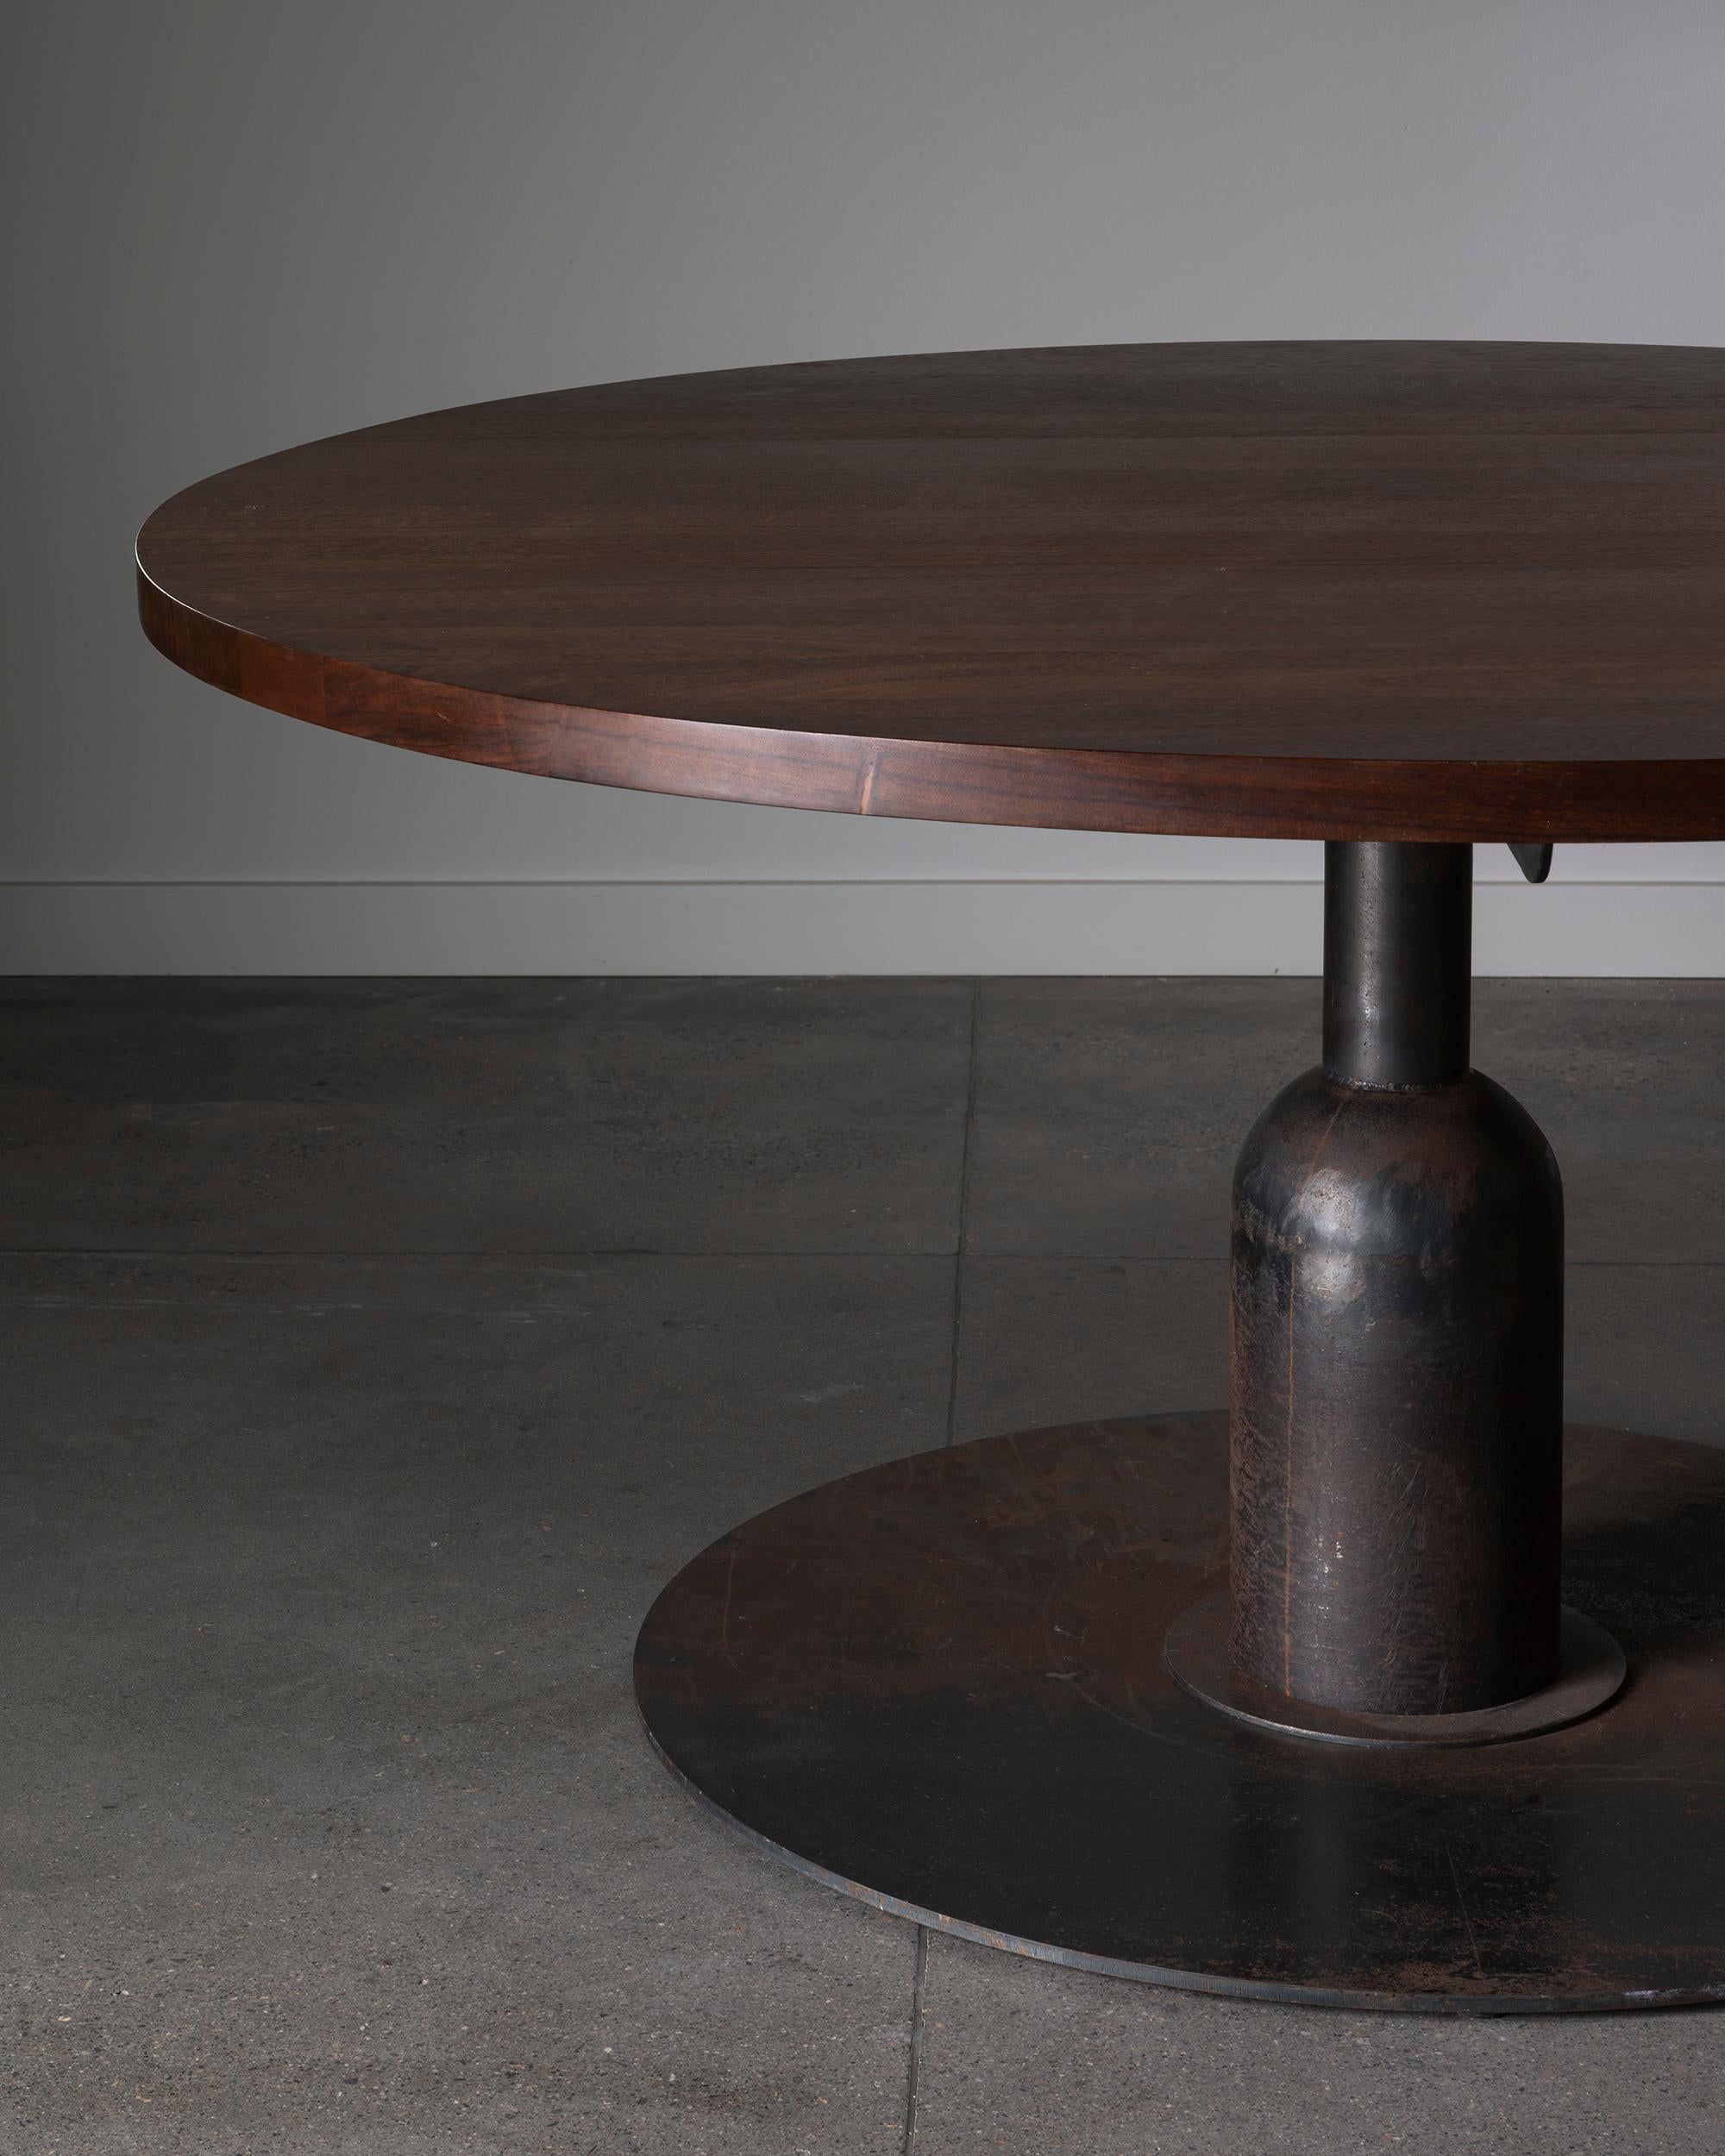 French 1950 - 60s brutalist dining table with and iron base and wooden top. Unusually large with an diameter of 59 inches. ca 1950 - 60s France. 